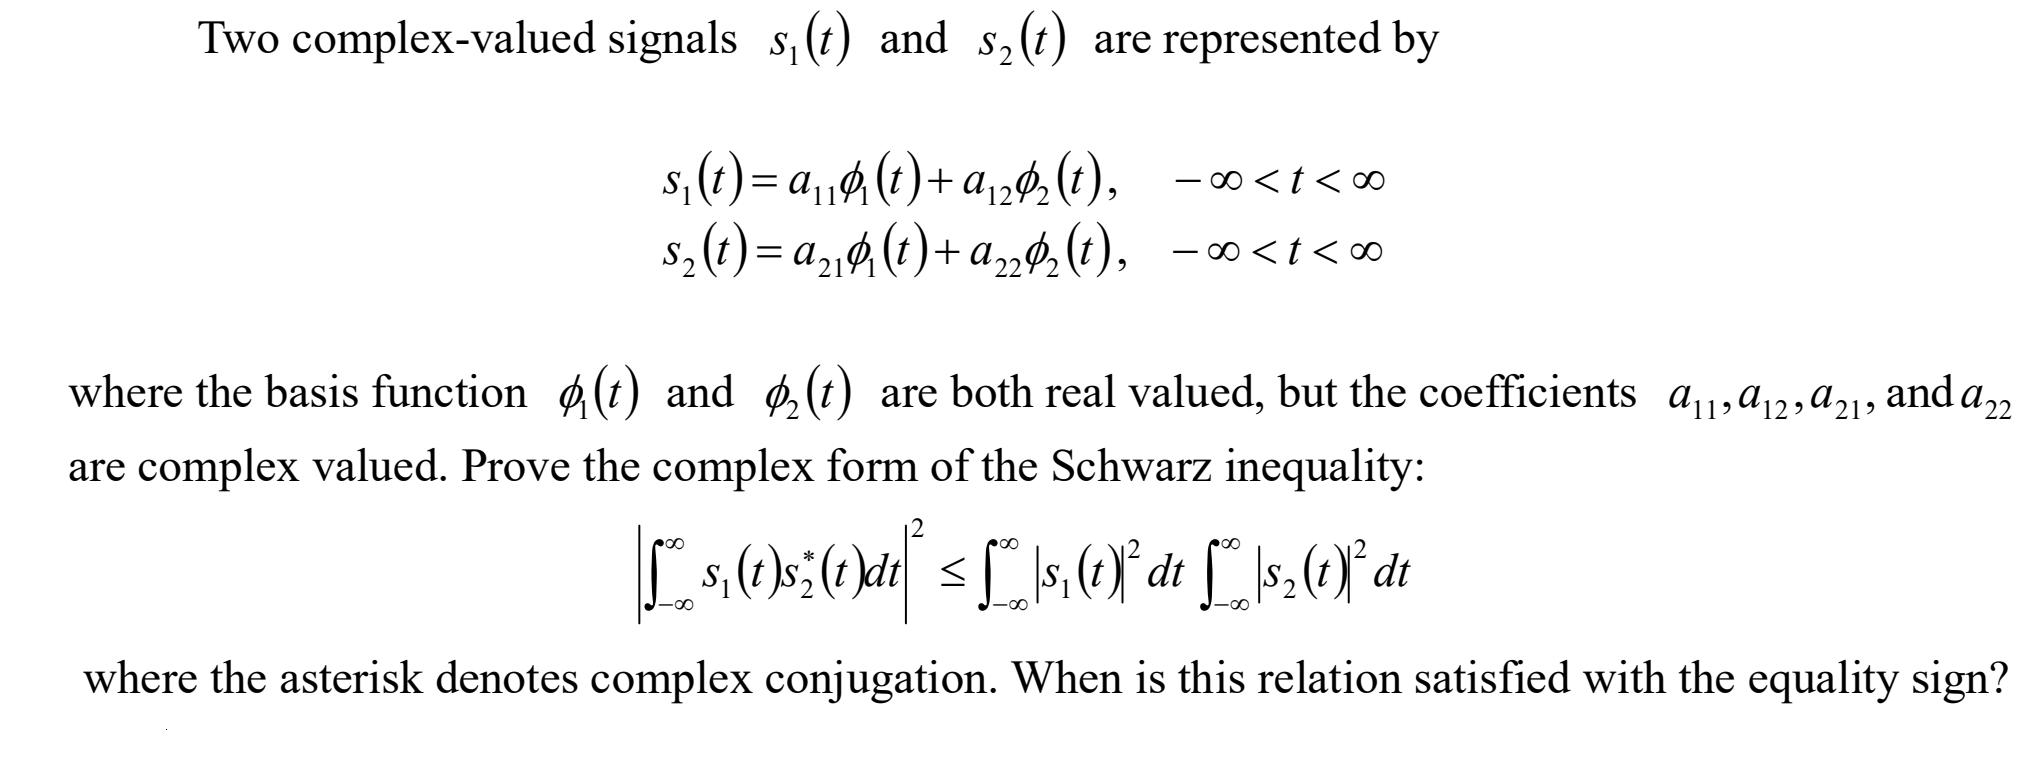 Two complex-valued signals s, (t) and s(t) are represented by s(t)= ah (t) + a,2 (t), s(t) = h (t) + a222